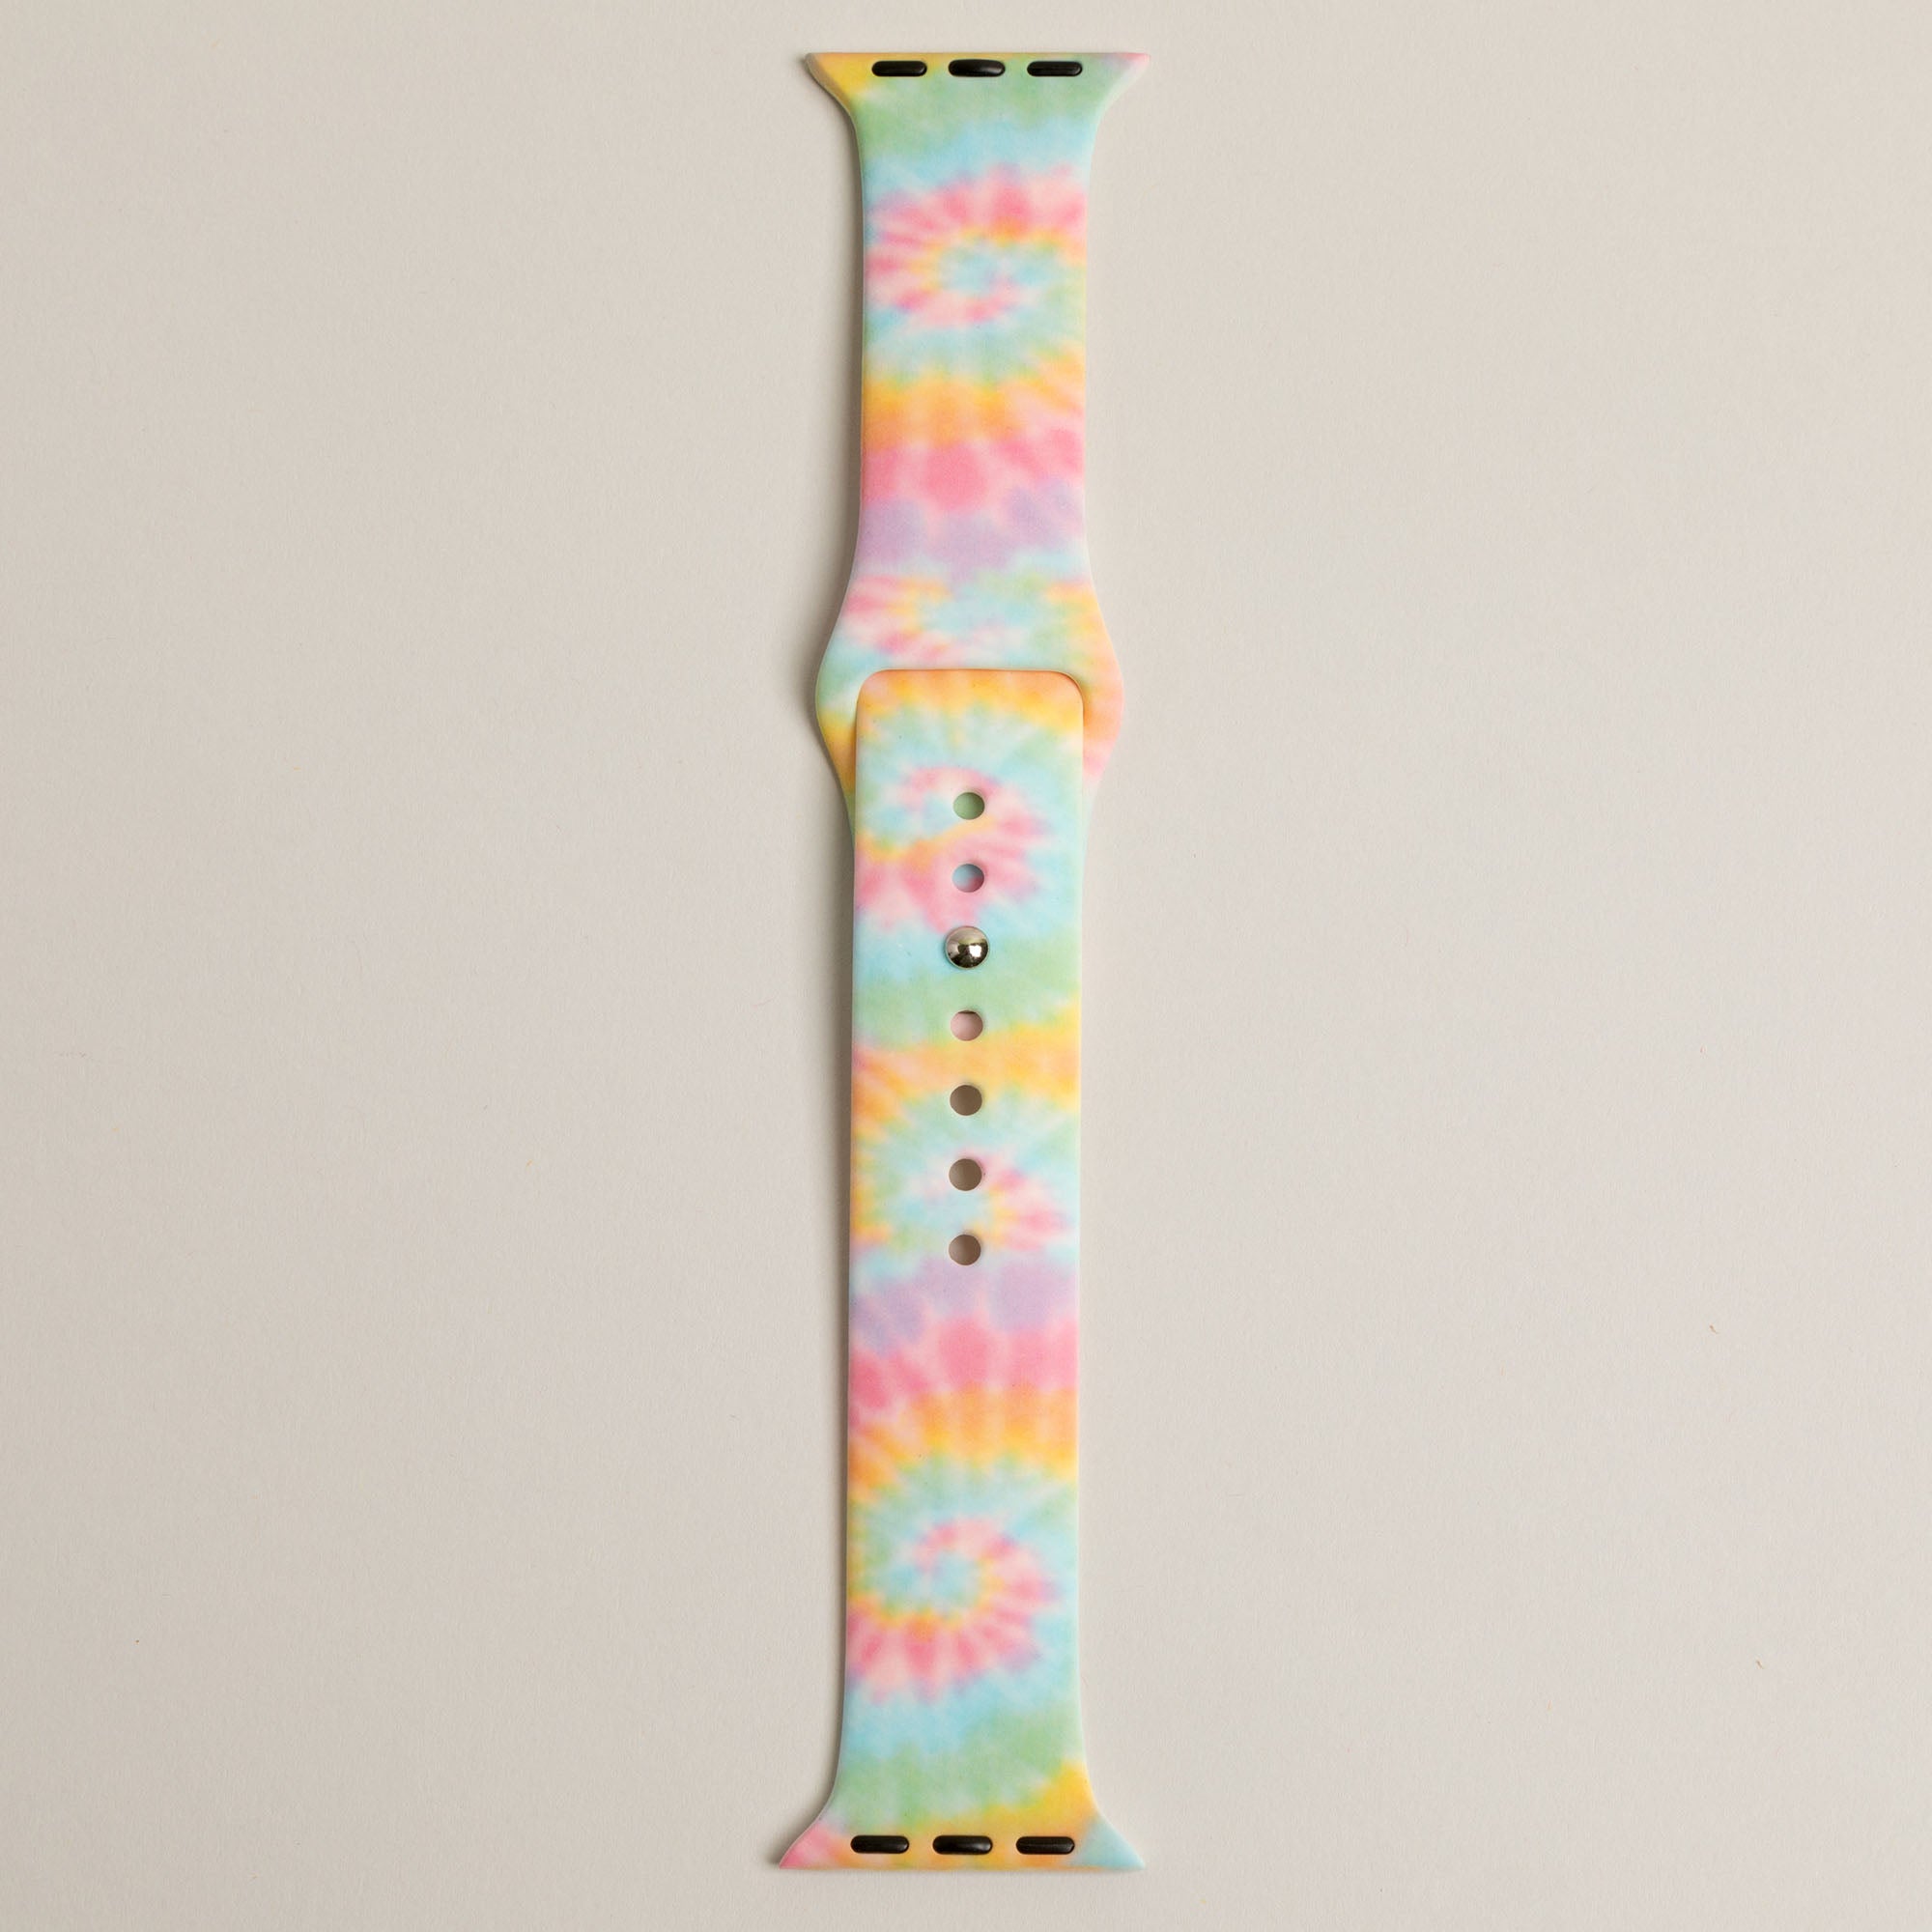 Patterned Silicone Apple Watch Band 38mm/40mm 42mm/44mm - Rainbow Tie-Dye - 38mm/40mm